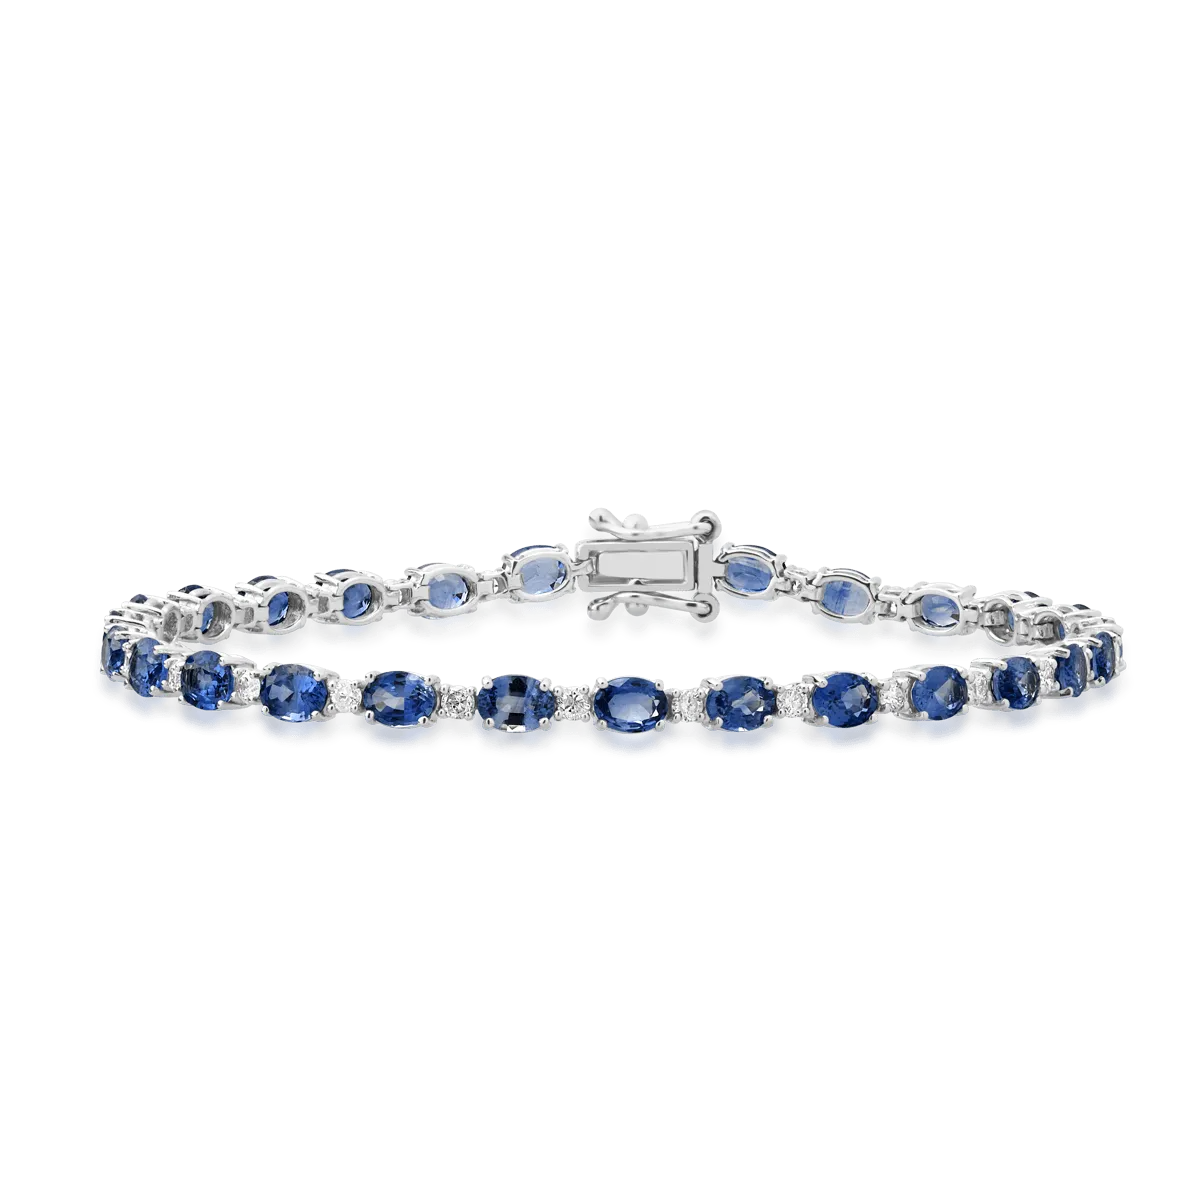 18K white gold tennis bracelet with 6.31ct light blue sapphires and 0.64ct diamonds